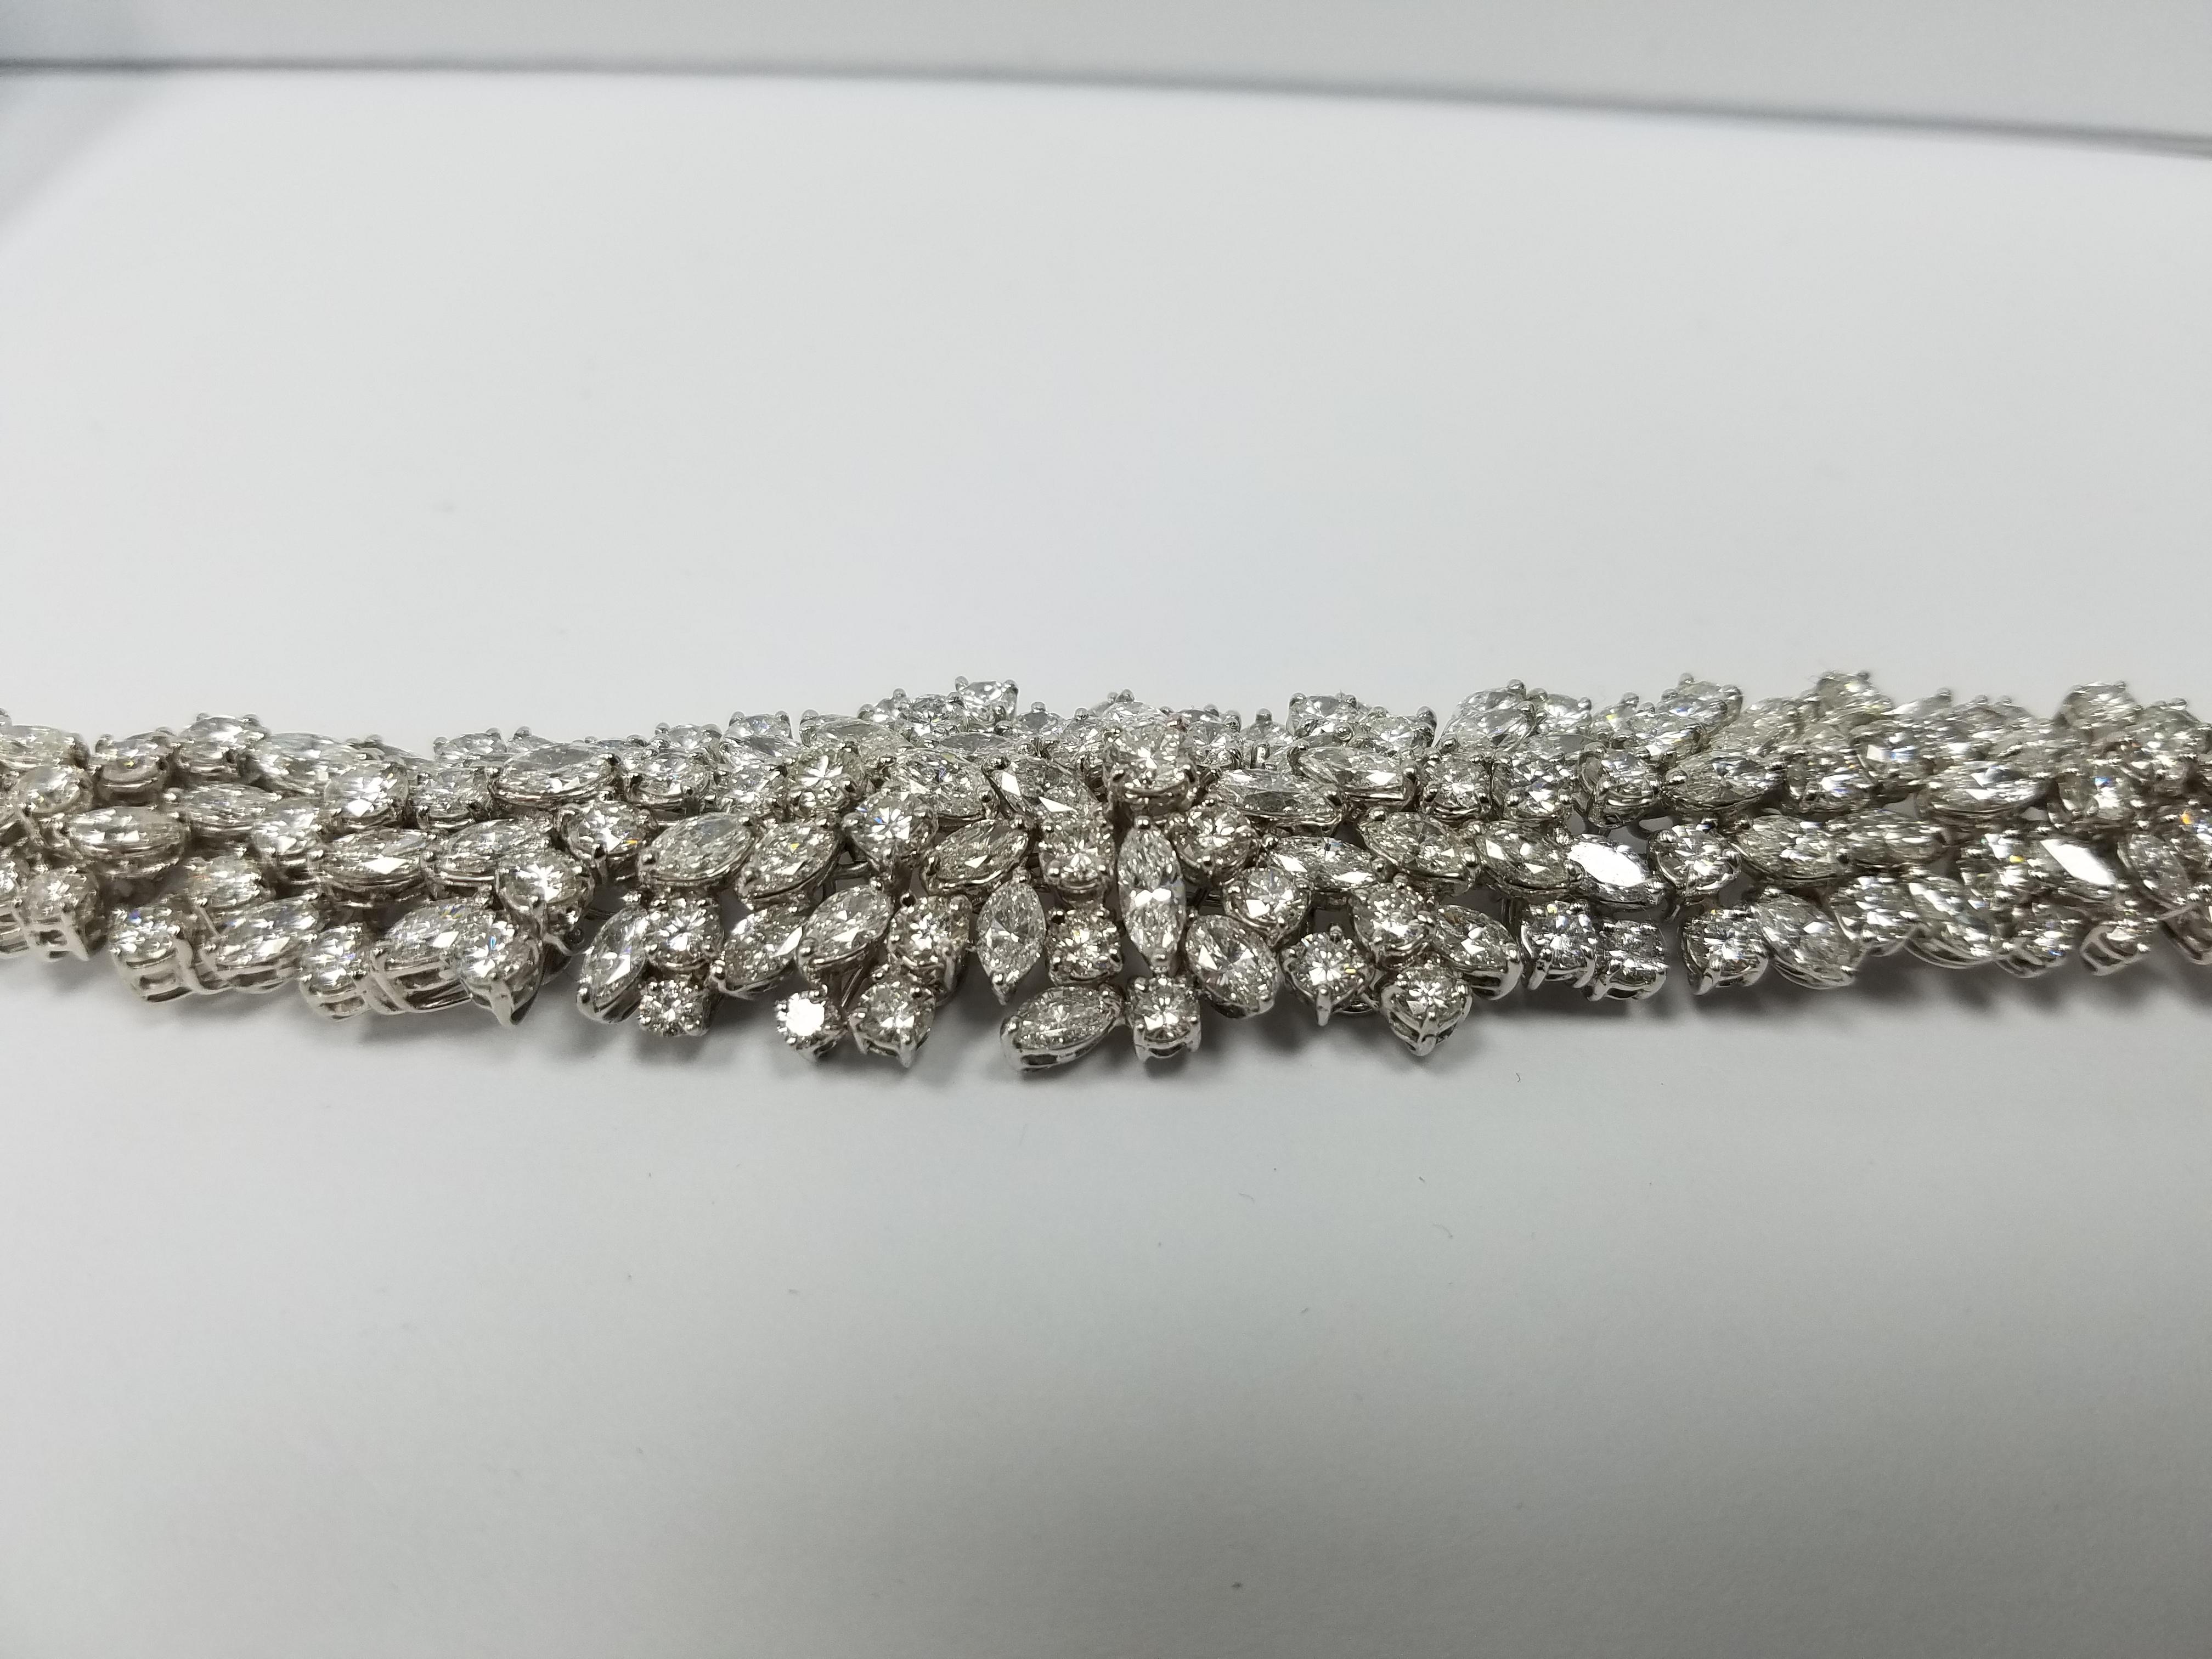 Platinum Stone on Stone Style cluster bracelet with GH+ in color and VS quality white diamonds. Winston Inspired design. aprox 70 carats in diamonds. 